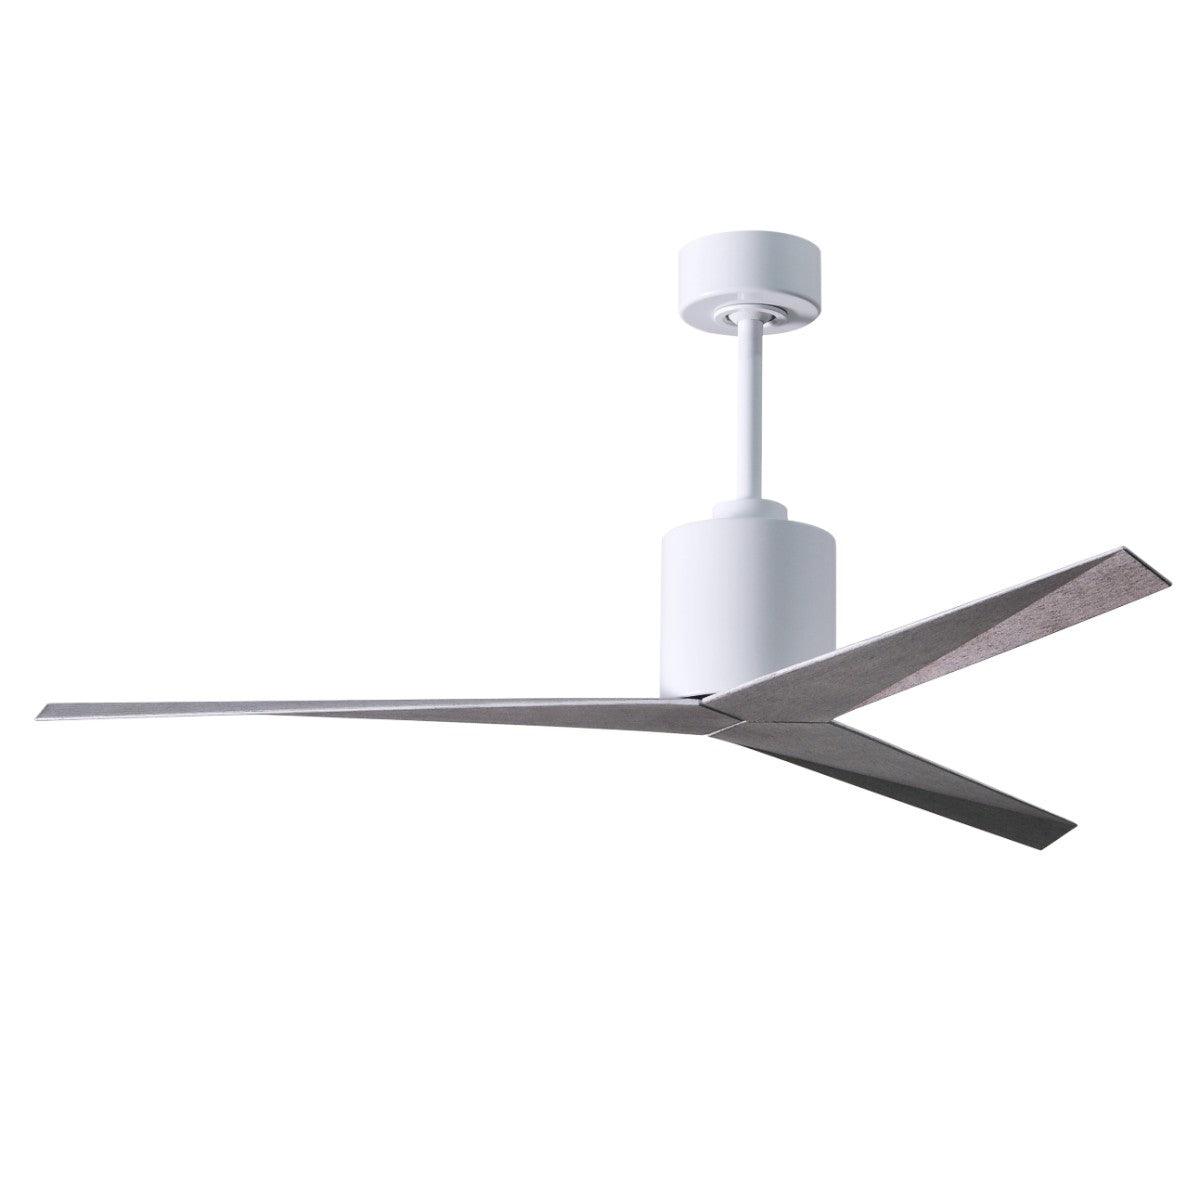 Eliza 56 Inch Propeller Outdoor Ceiling Fan, Wall/Remote Control Included - Bees Lighting